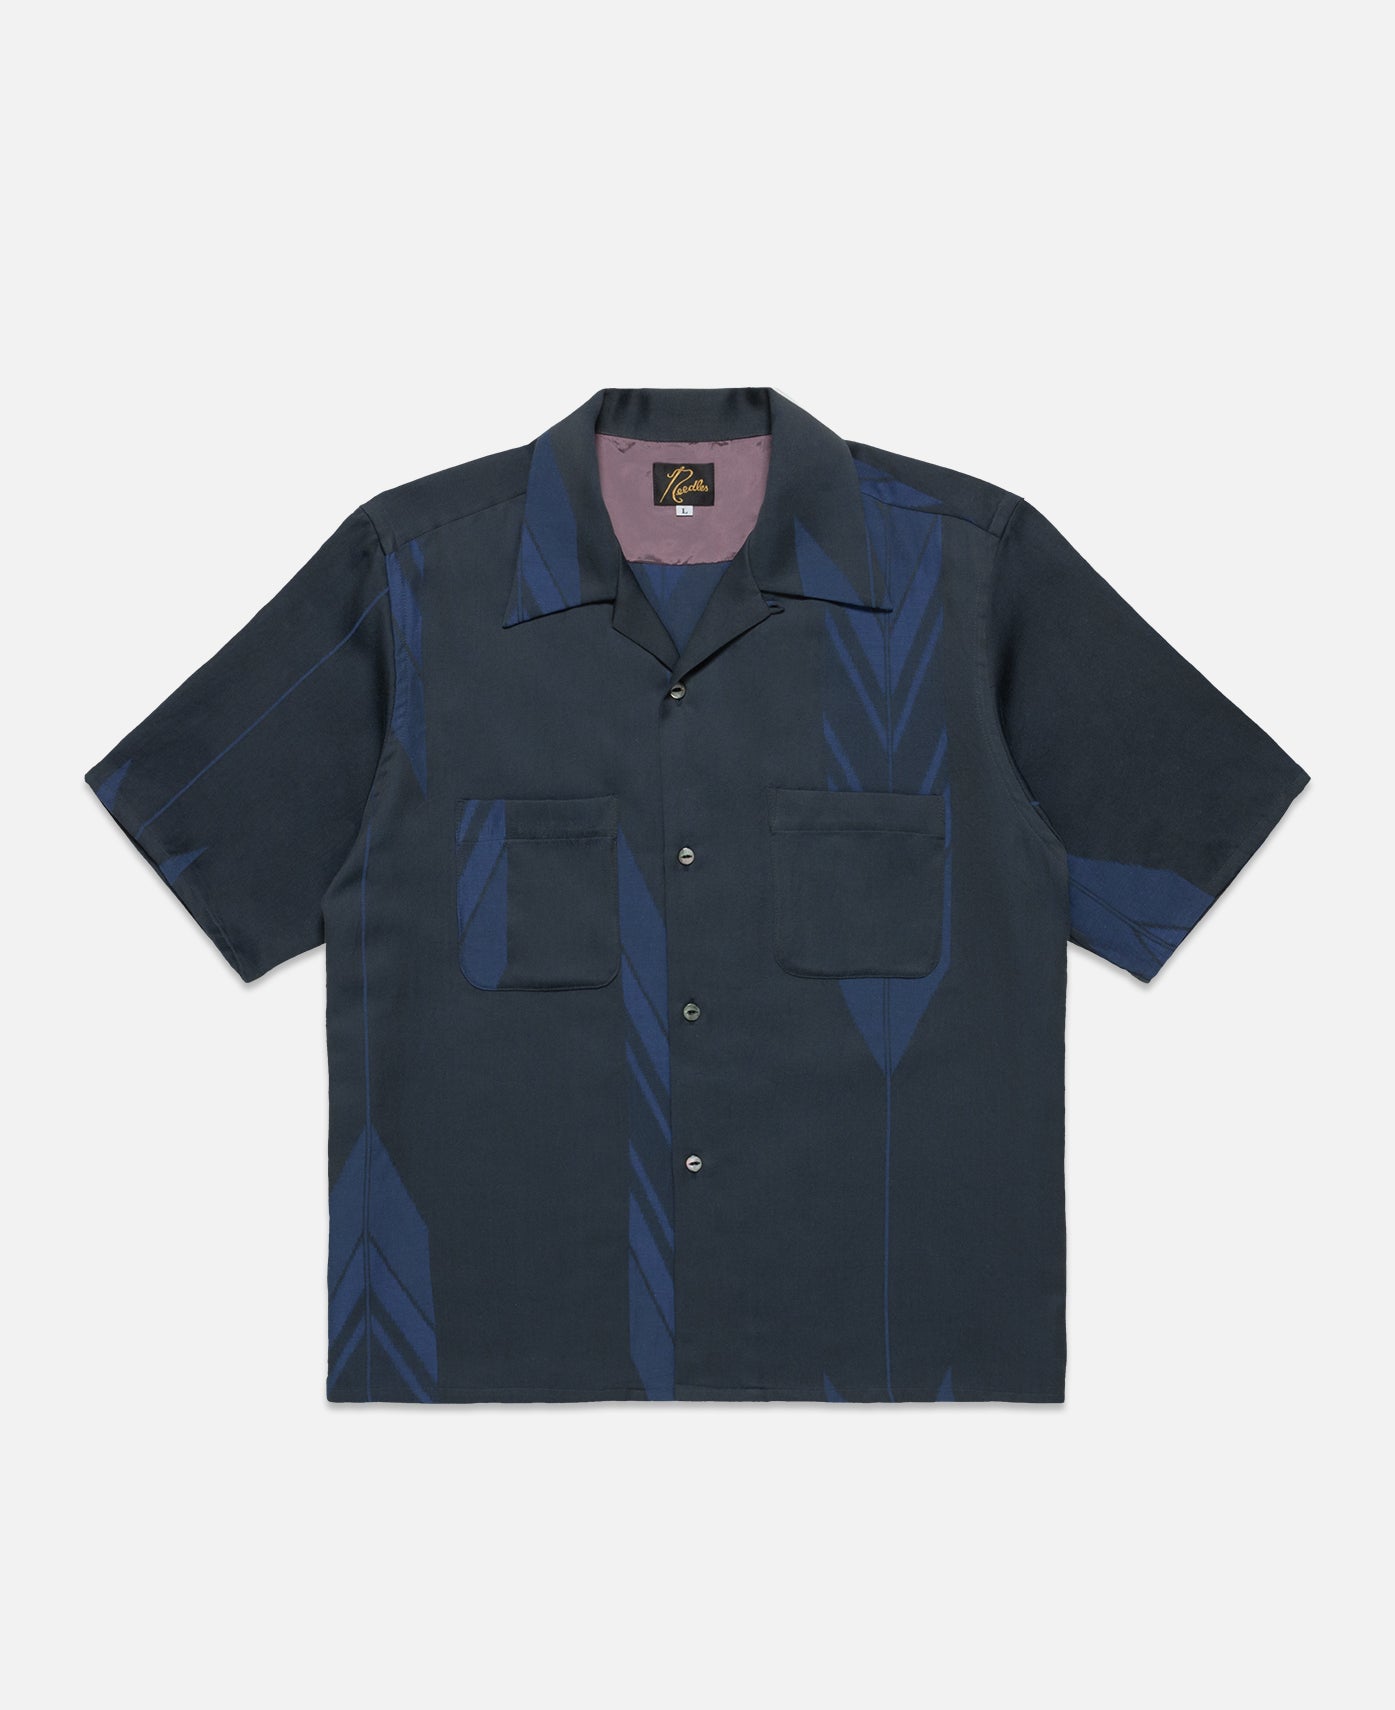 S/S One-Up Shirt (Blue)